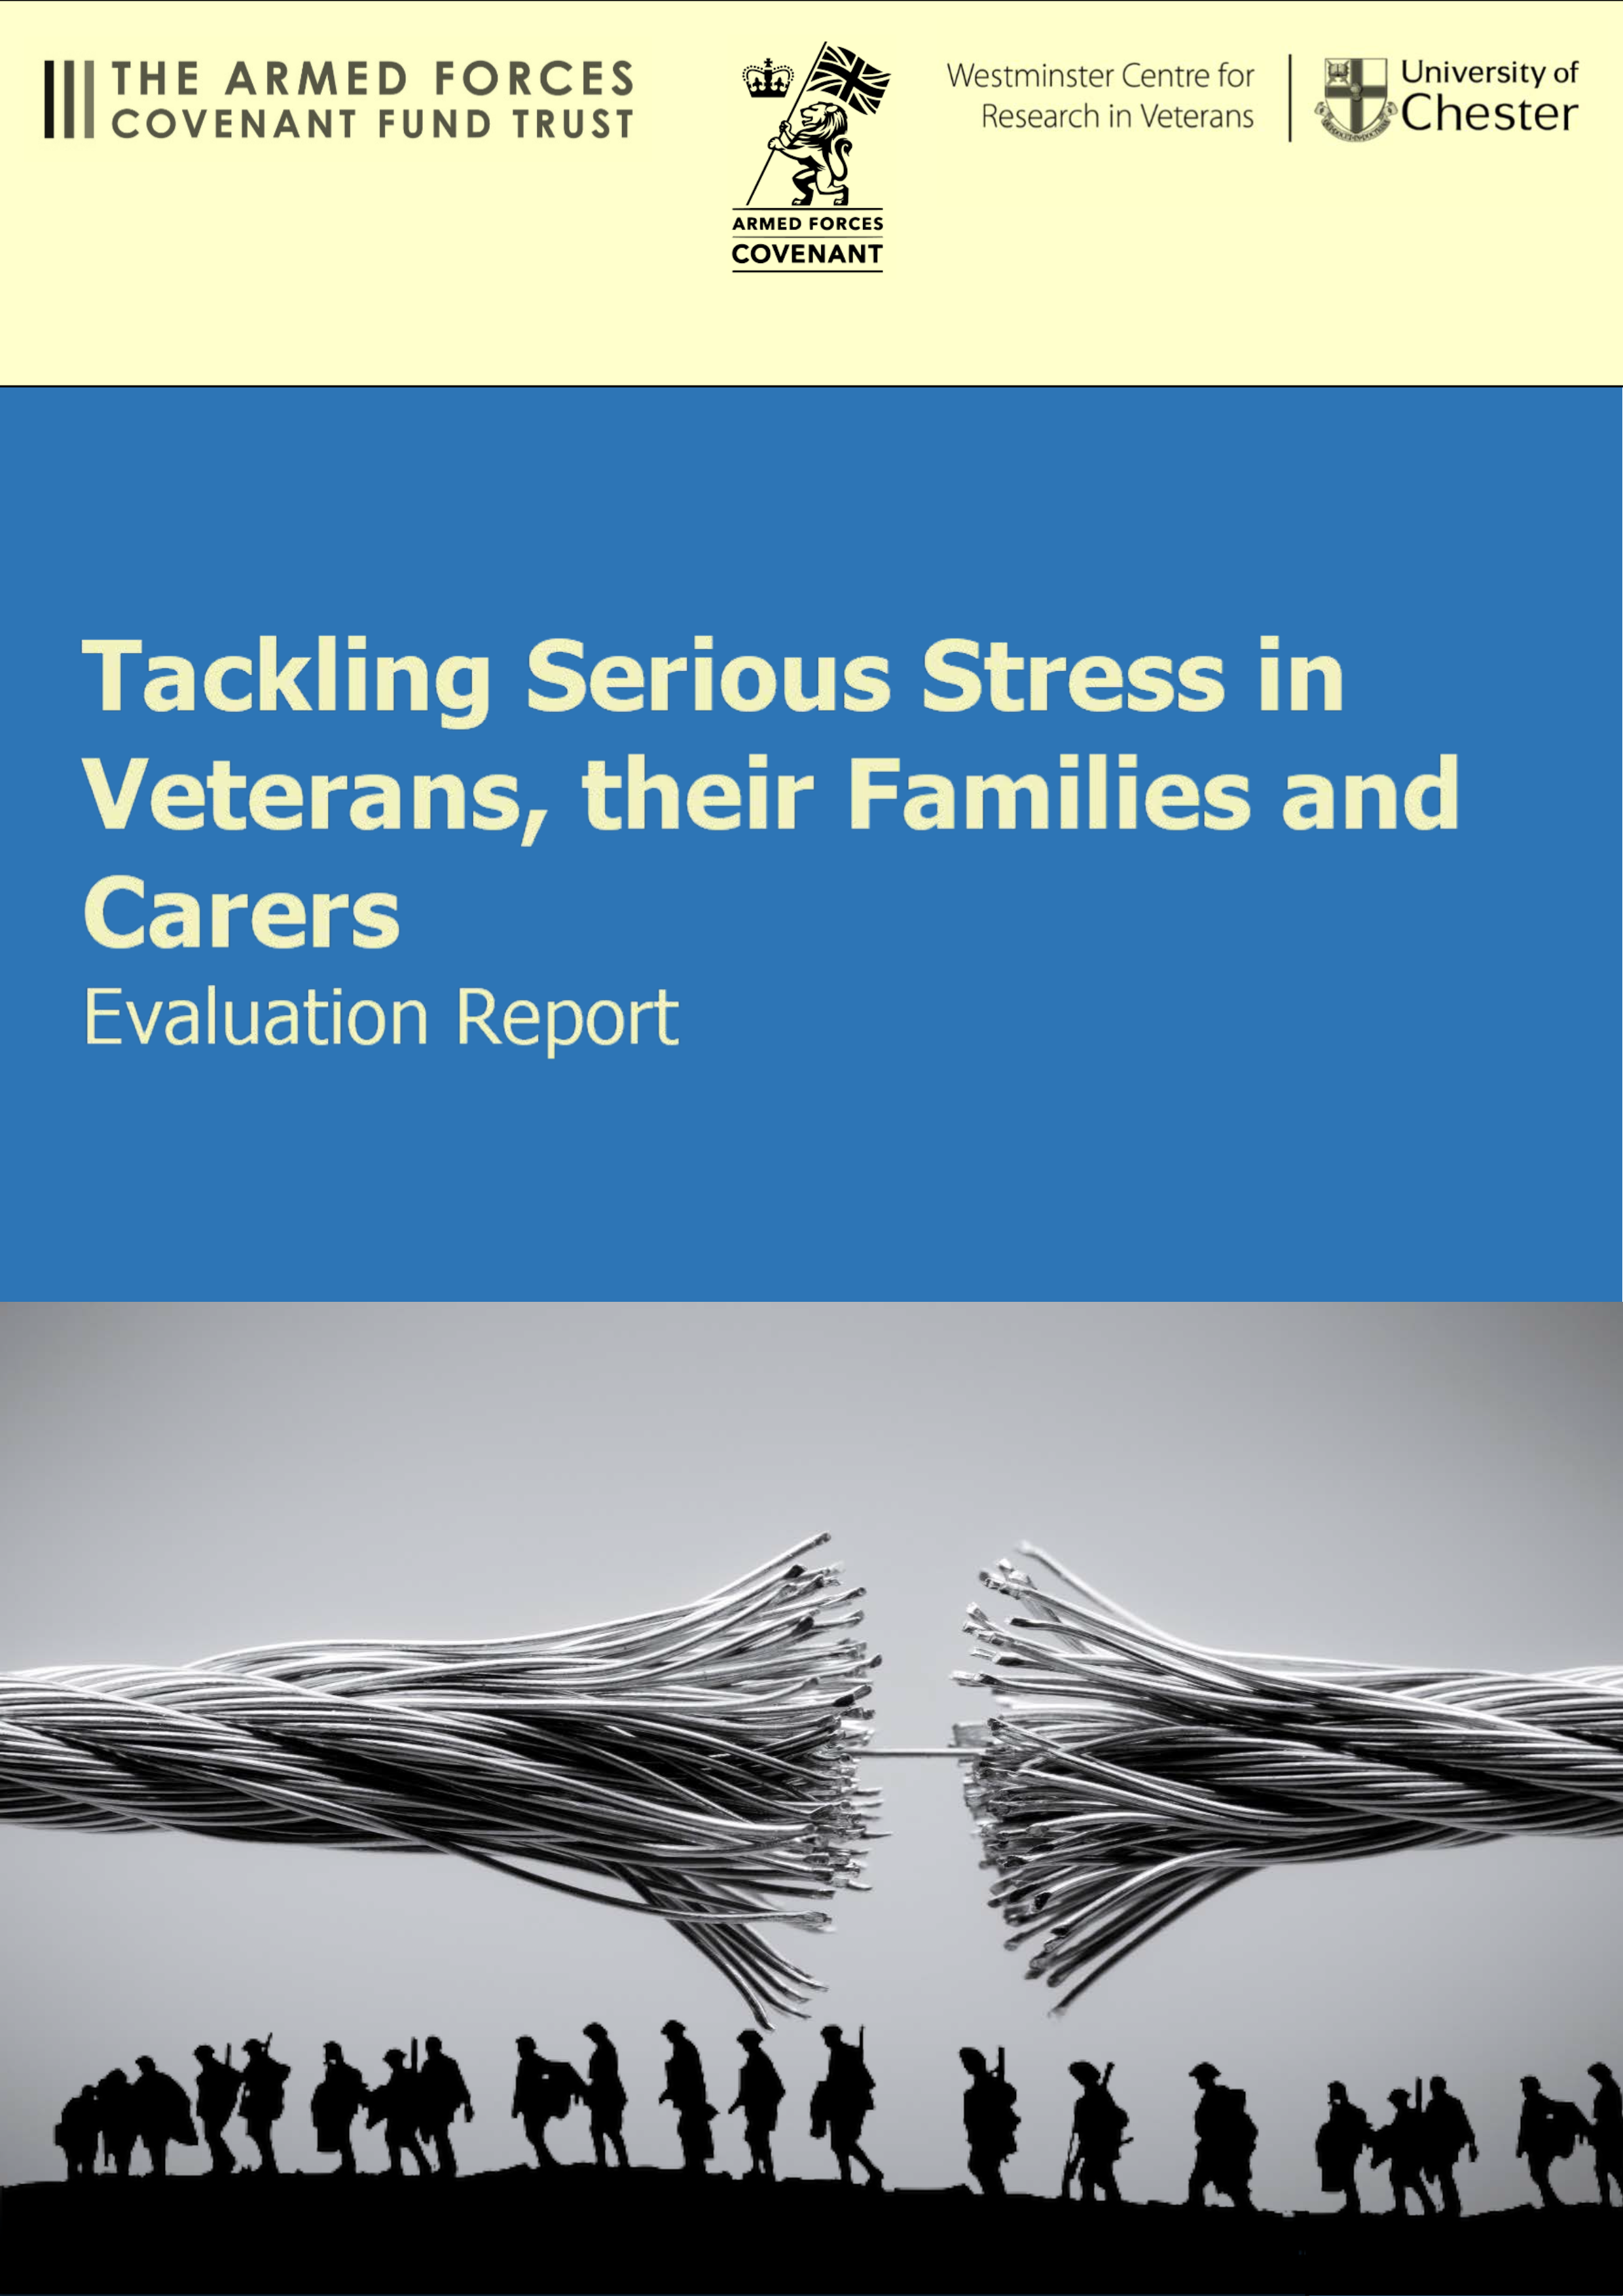 Tackling Serious Stress in Veterans, their Families and Carers